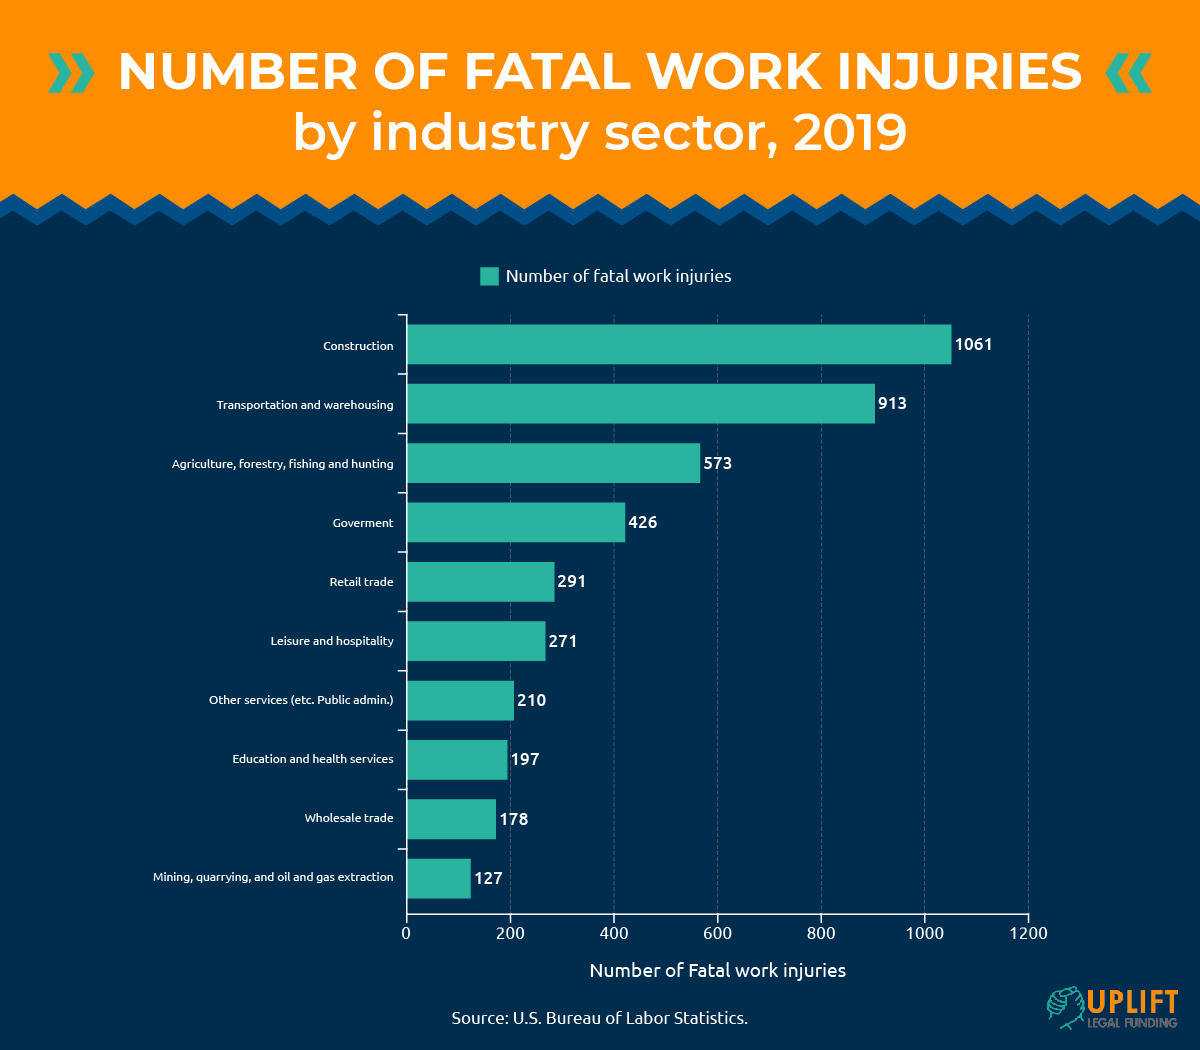 Number of fatal work injuries by industry sector